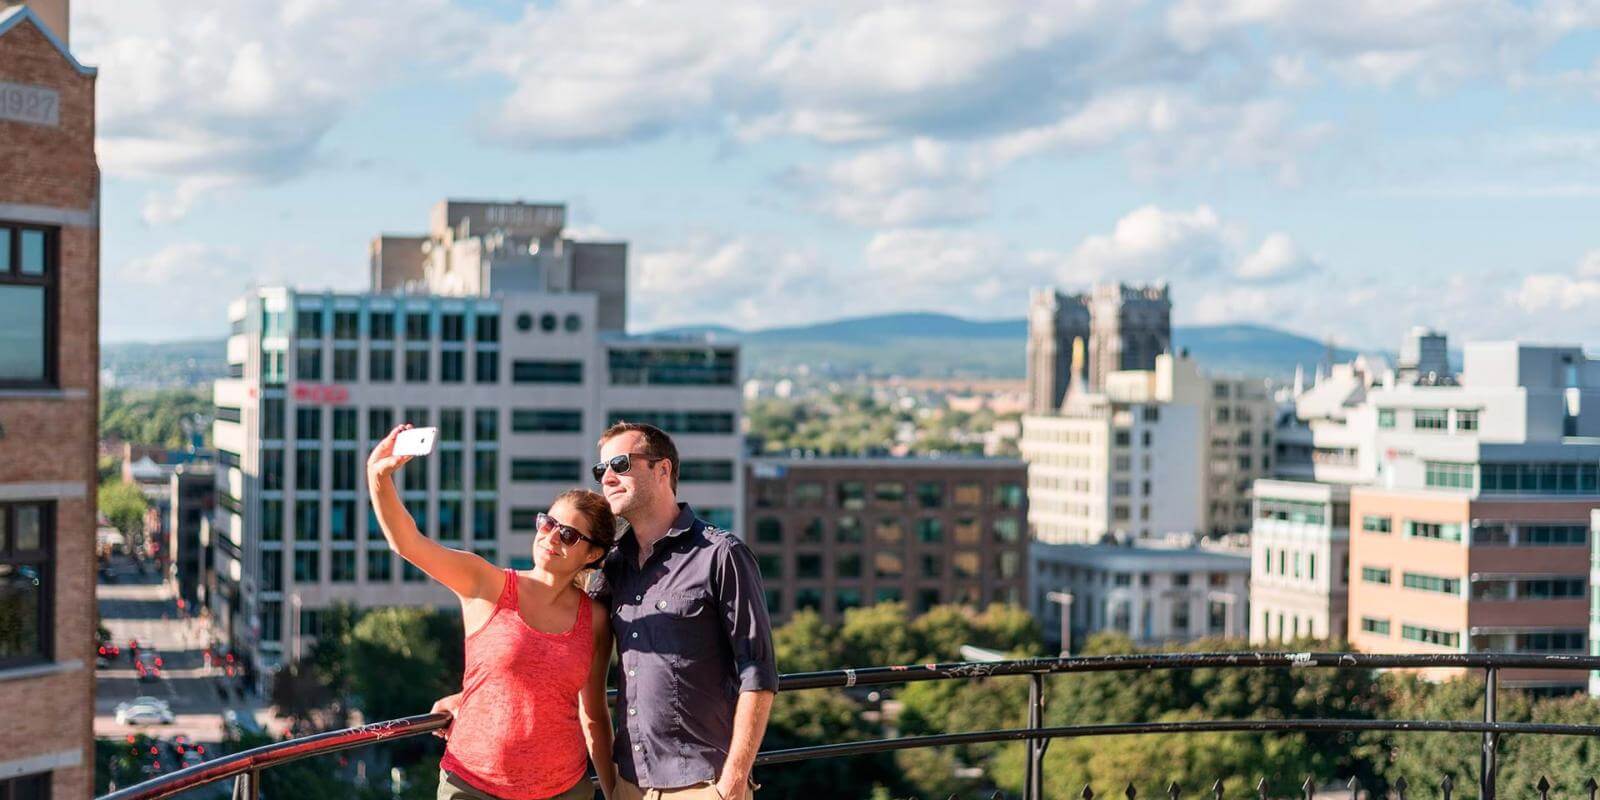 A couple takes a photo at the top of the Faubourg staircase with a view of the Saint-Roch district in the background.